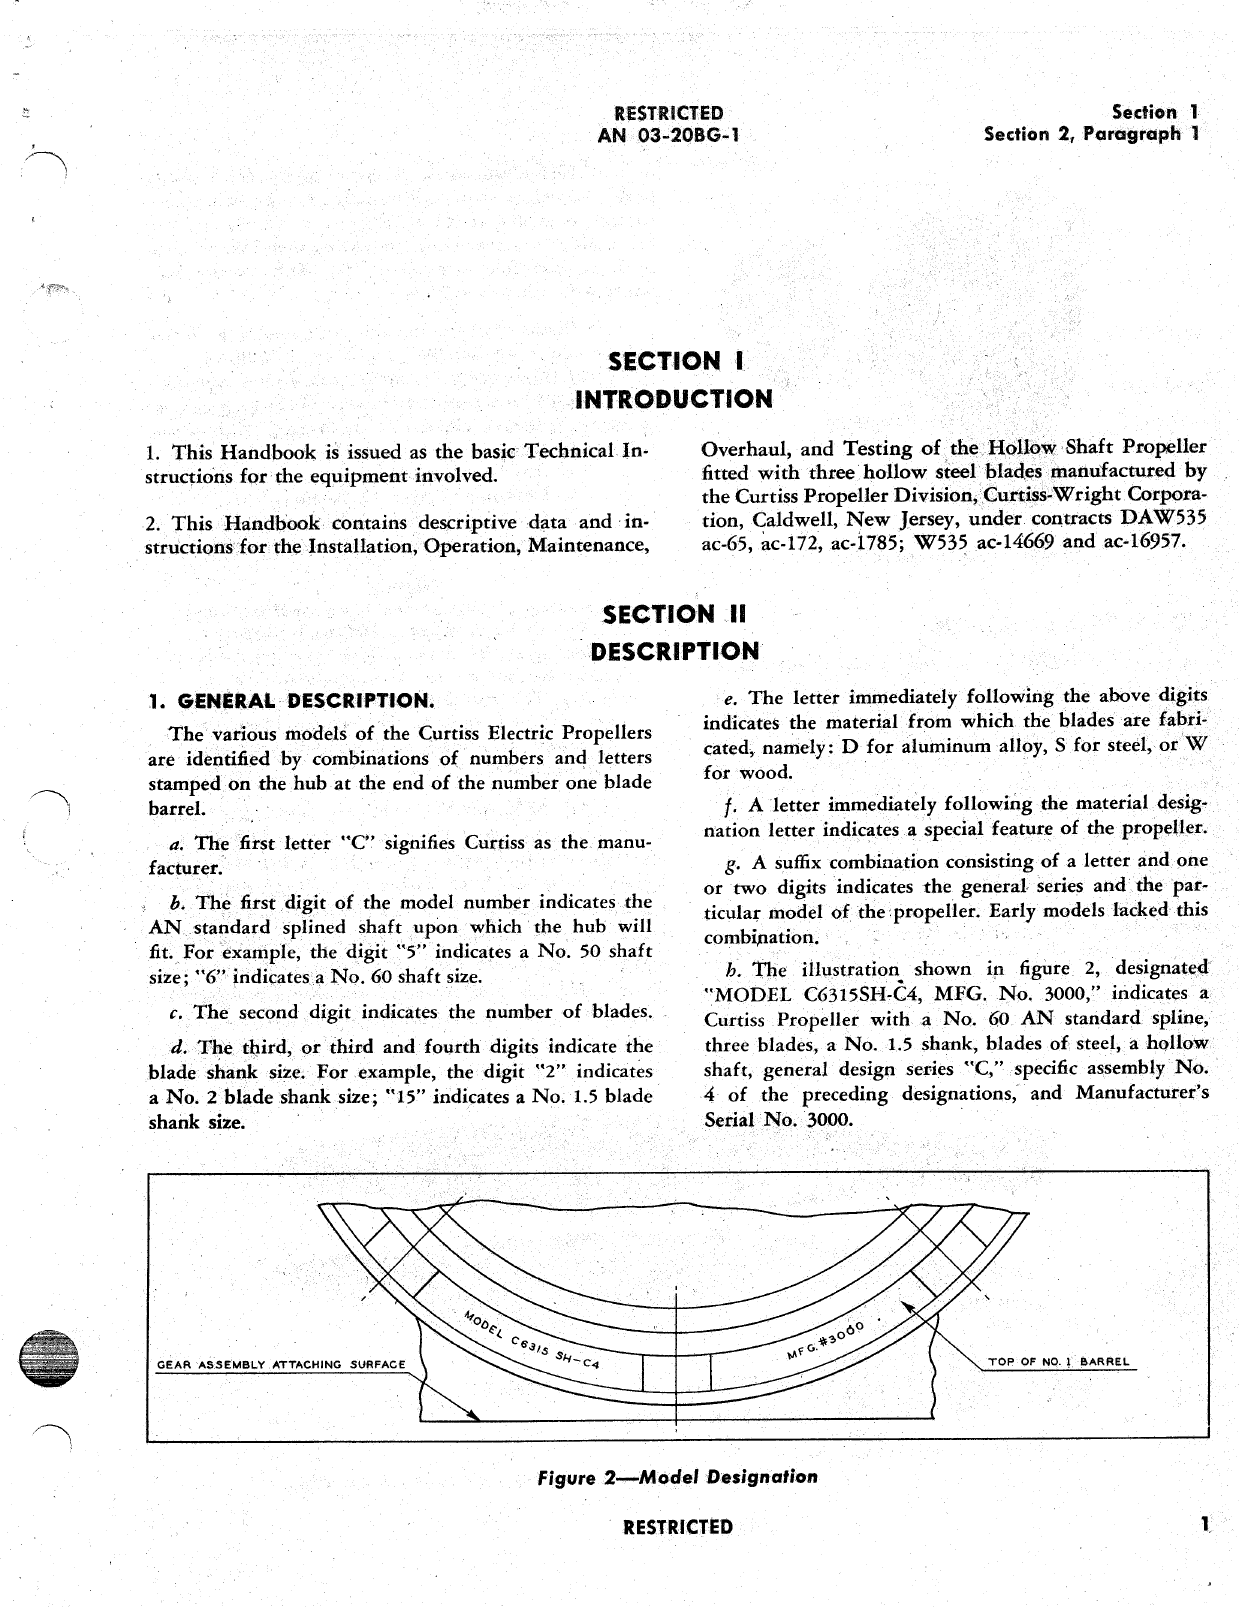 Sample page 5 from AirCorps Library document: Handbook of Instructions with Parts Catalog for Hollow Shaft (Three Blade) Propeller Model C6315SH